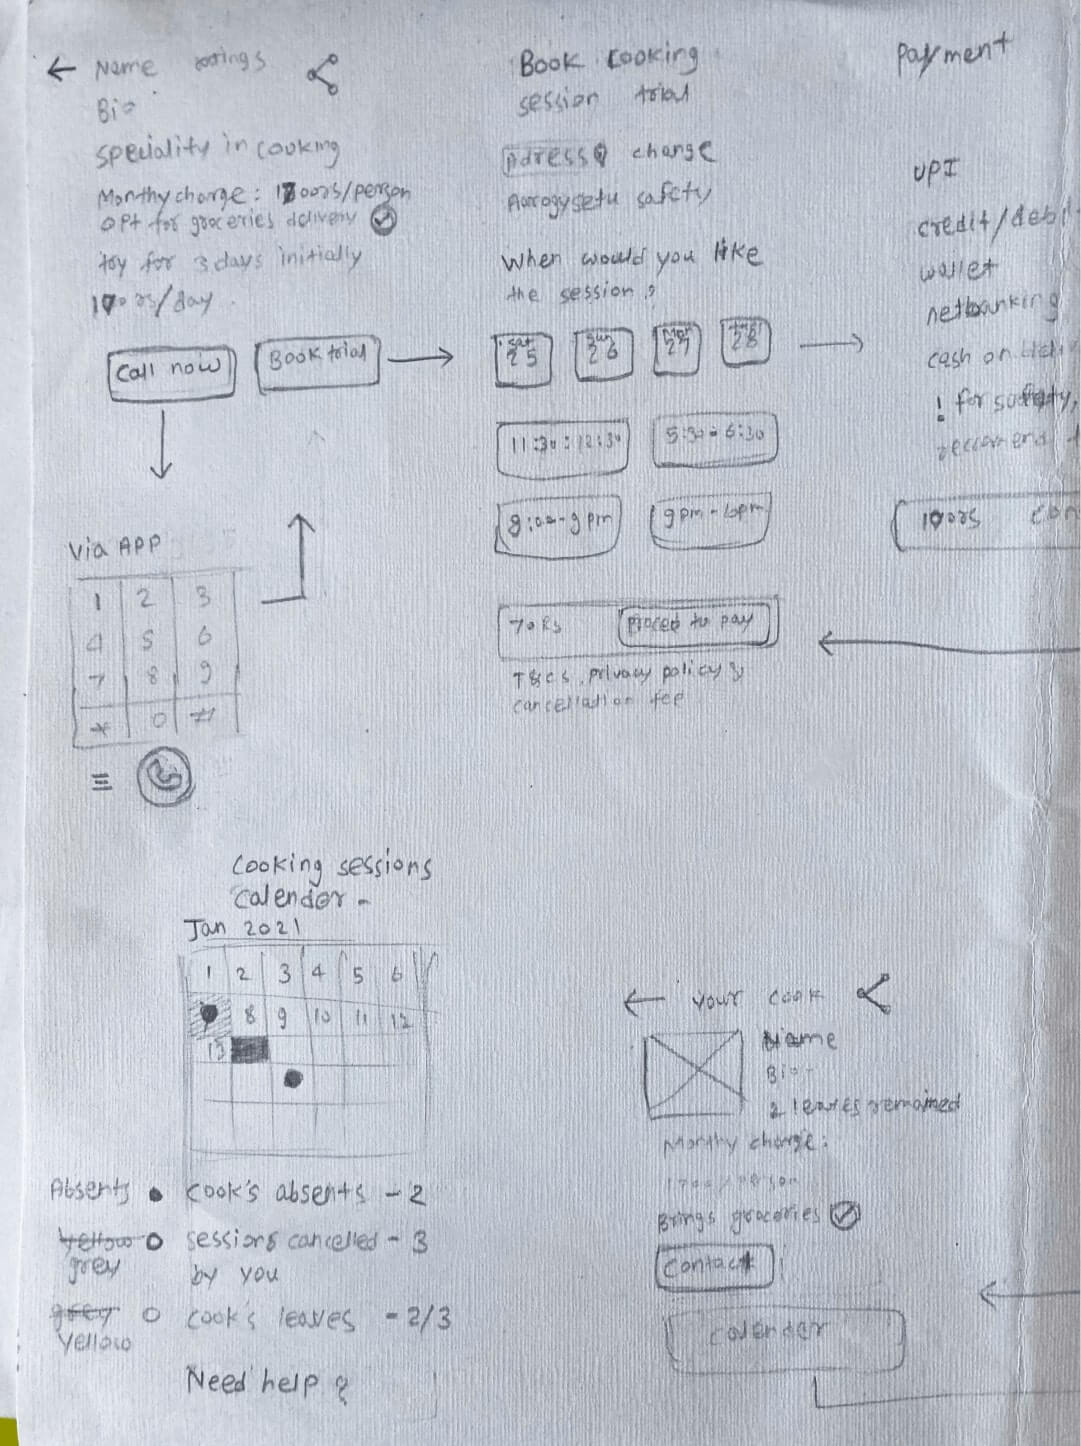 rough sketches to visualize user's profile